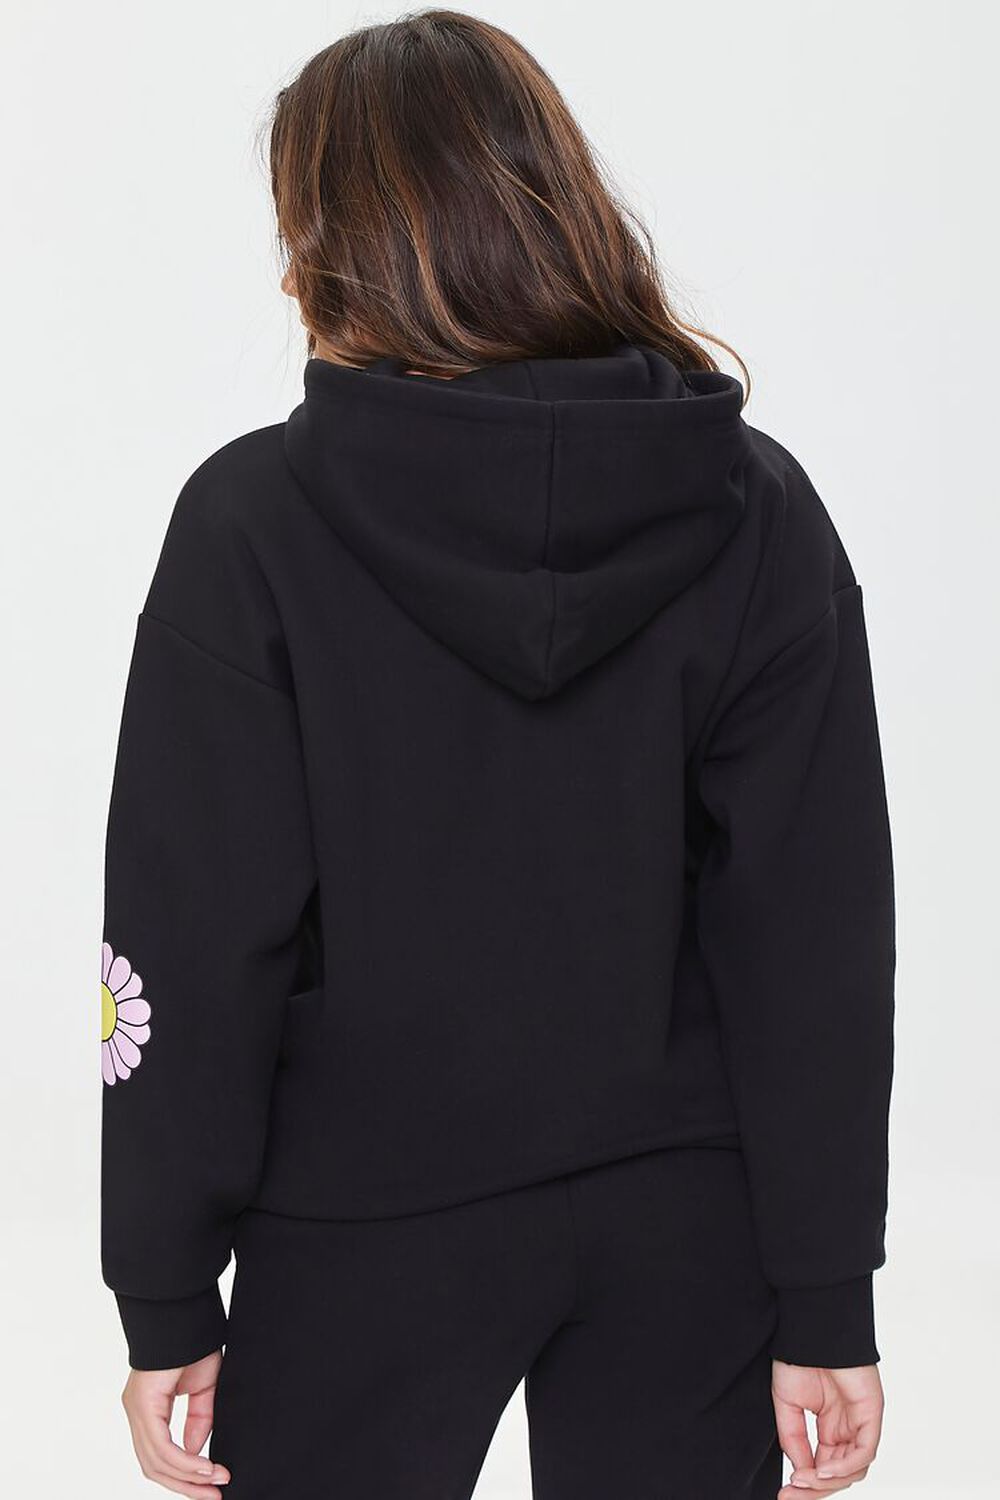 BLACK/MULTI In My Happy Place Graphic Hoodie, image 3